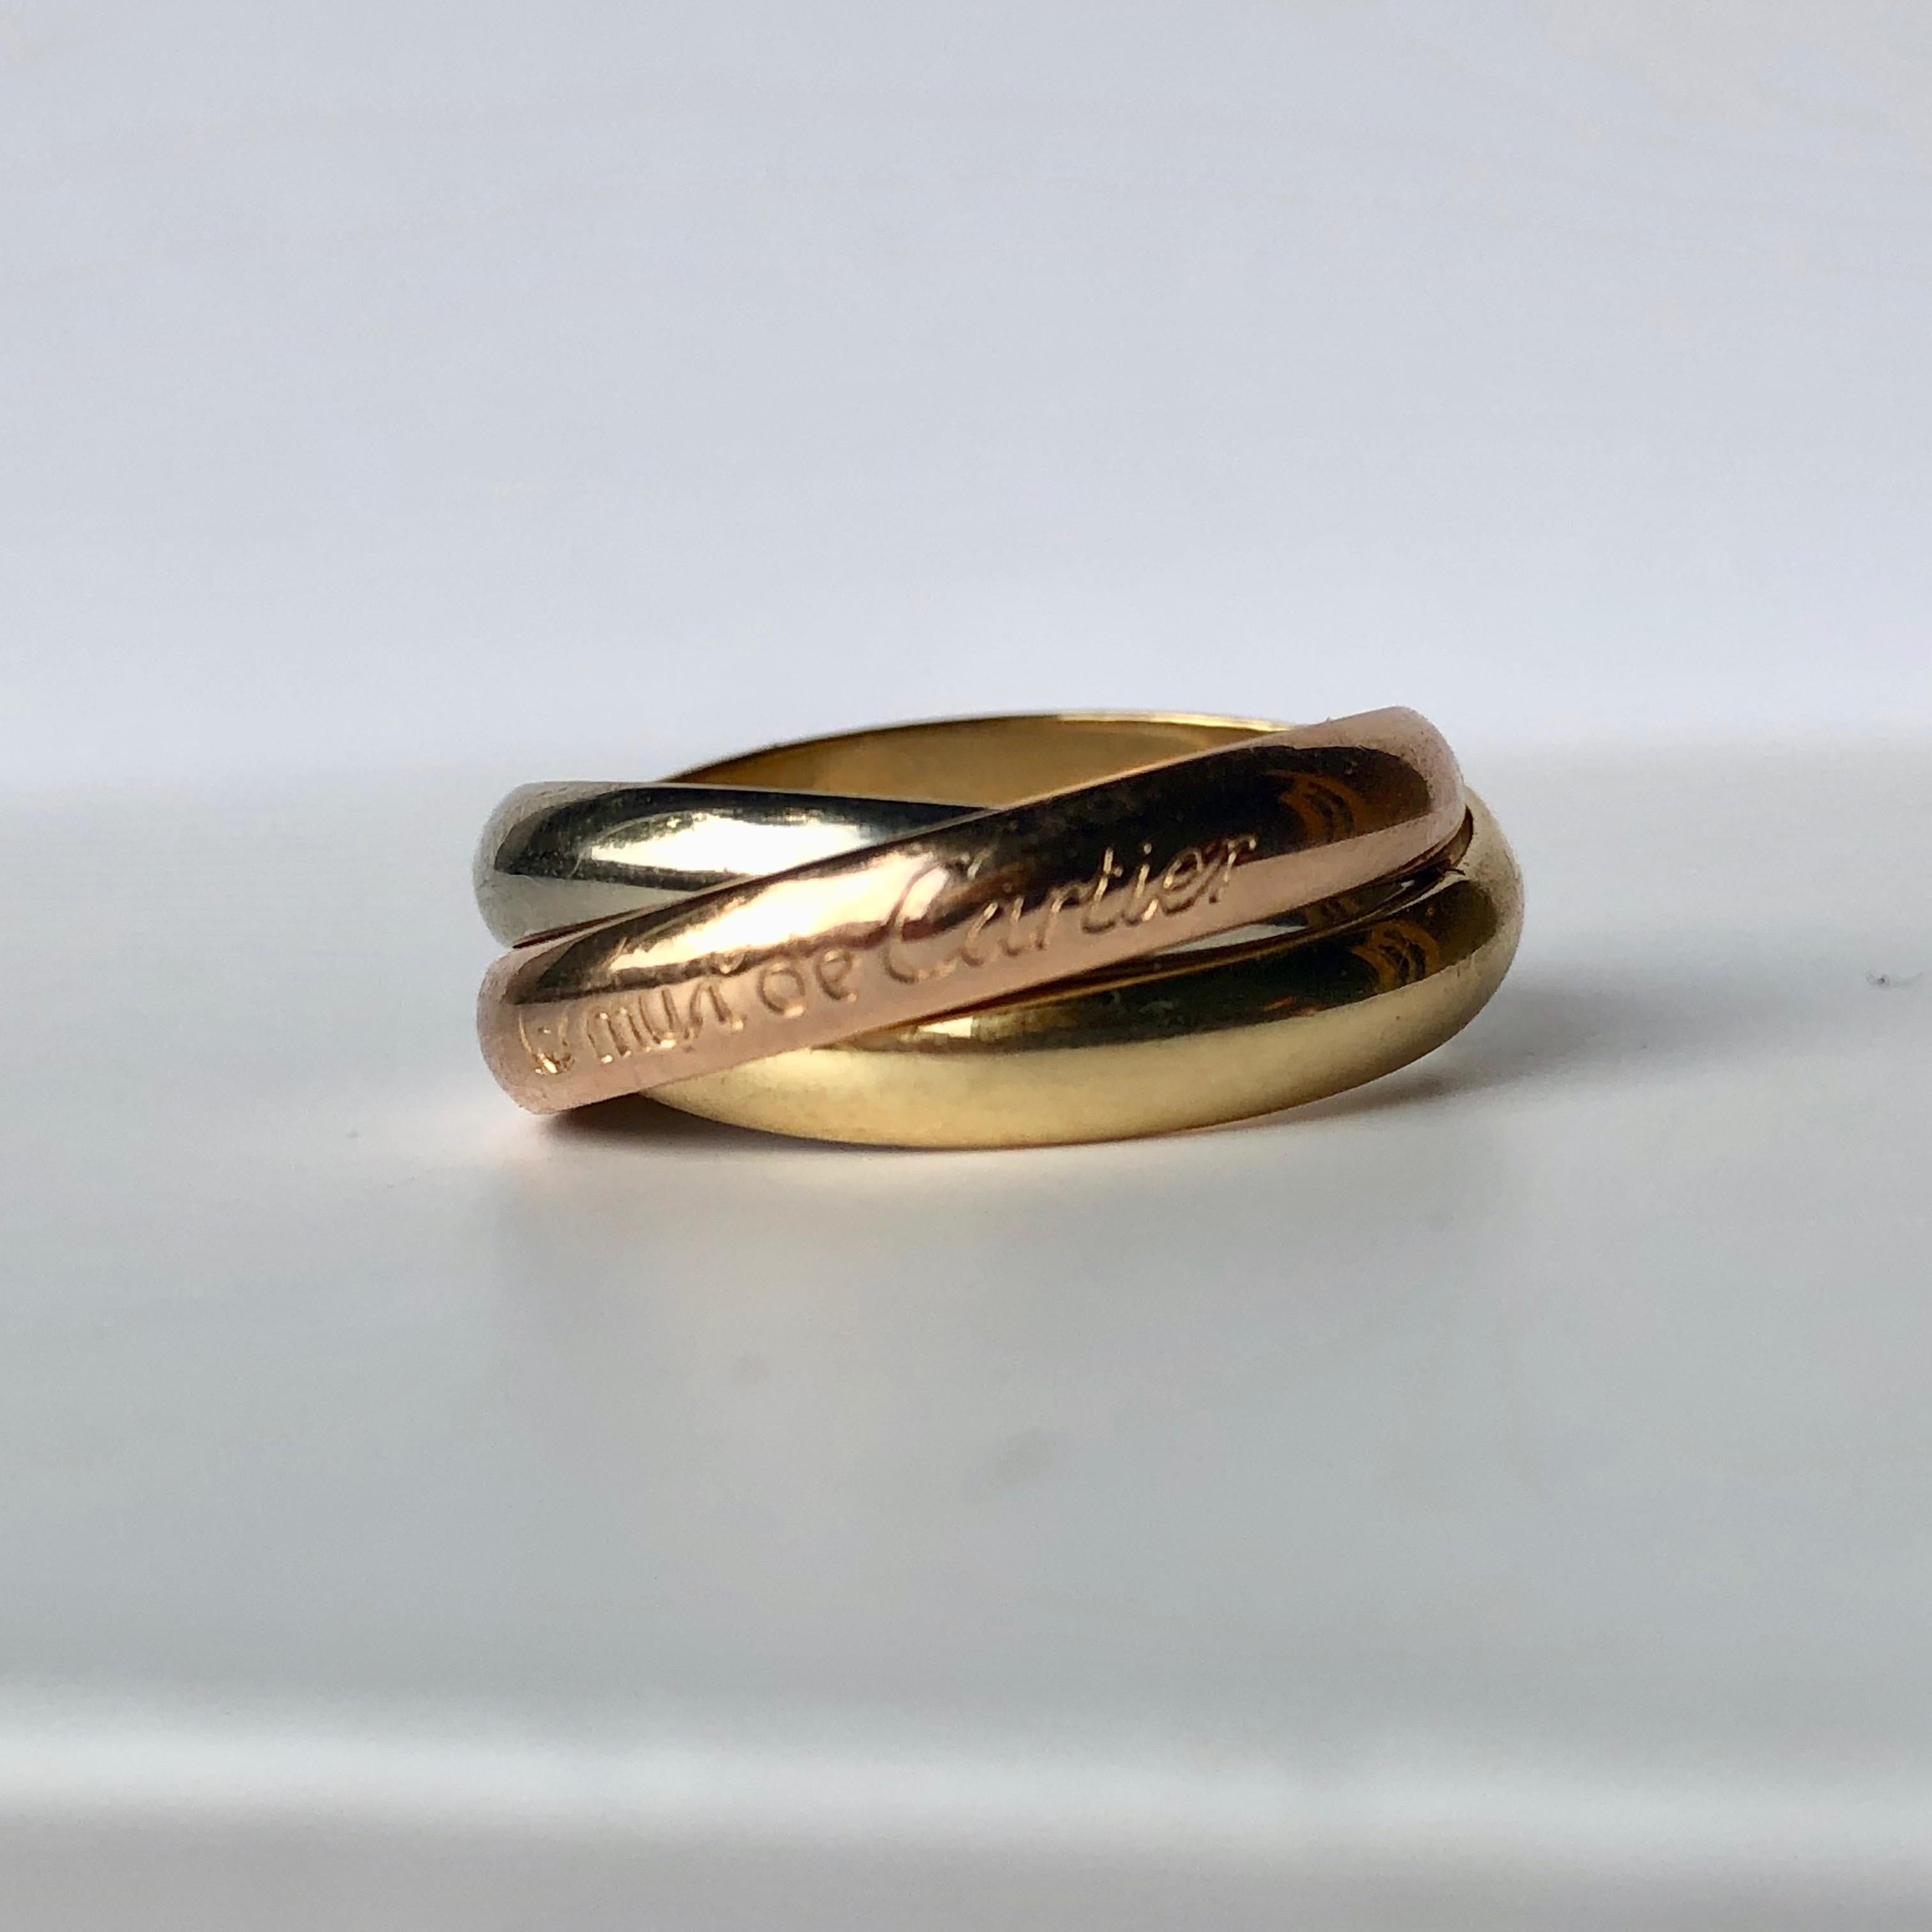 A Cartier 3 Colour Gold Russian Wedding Ring

The Trilogy Ring For Past, Present, Future

Size O

Worldwide Shipping 

Next day Dispatch 

Full Returns Policy 